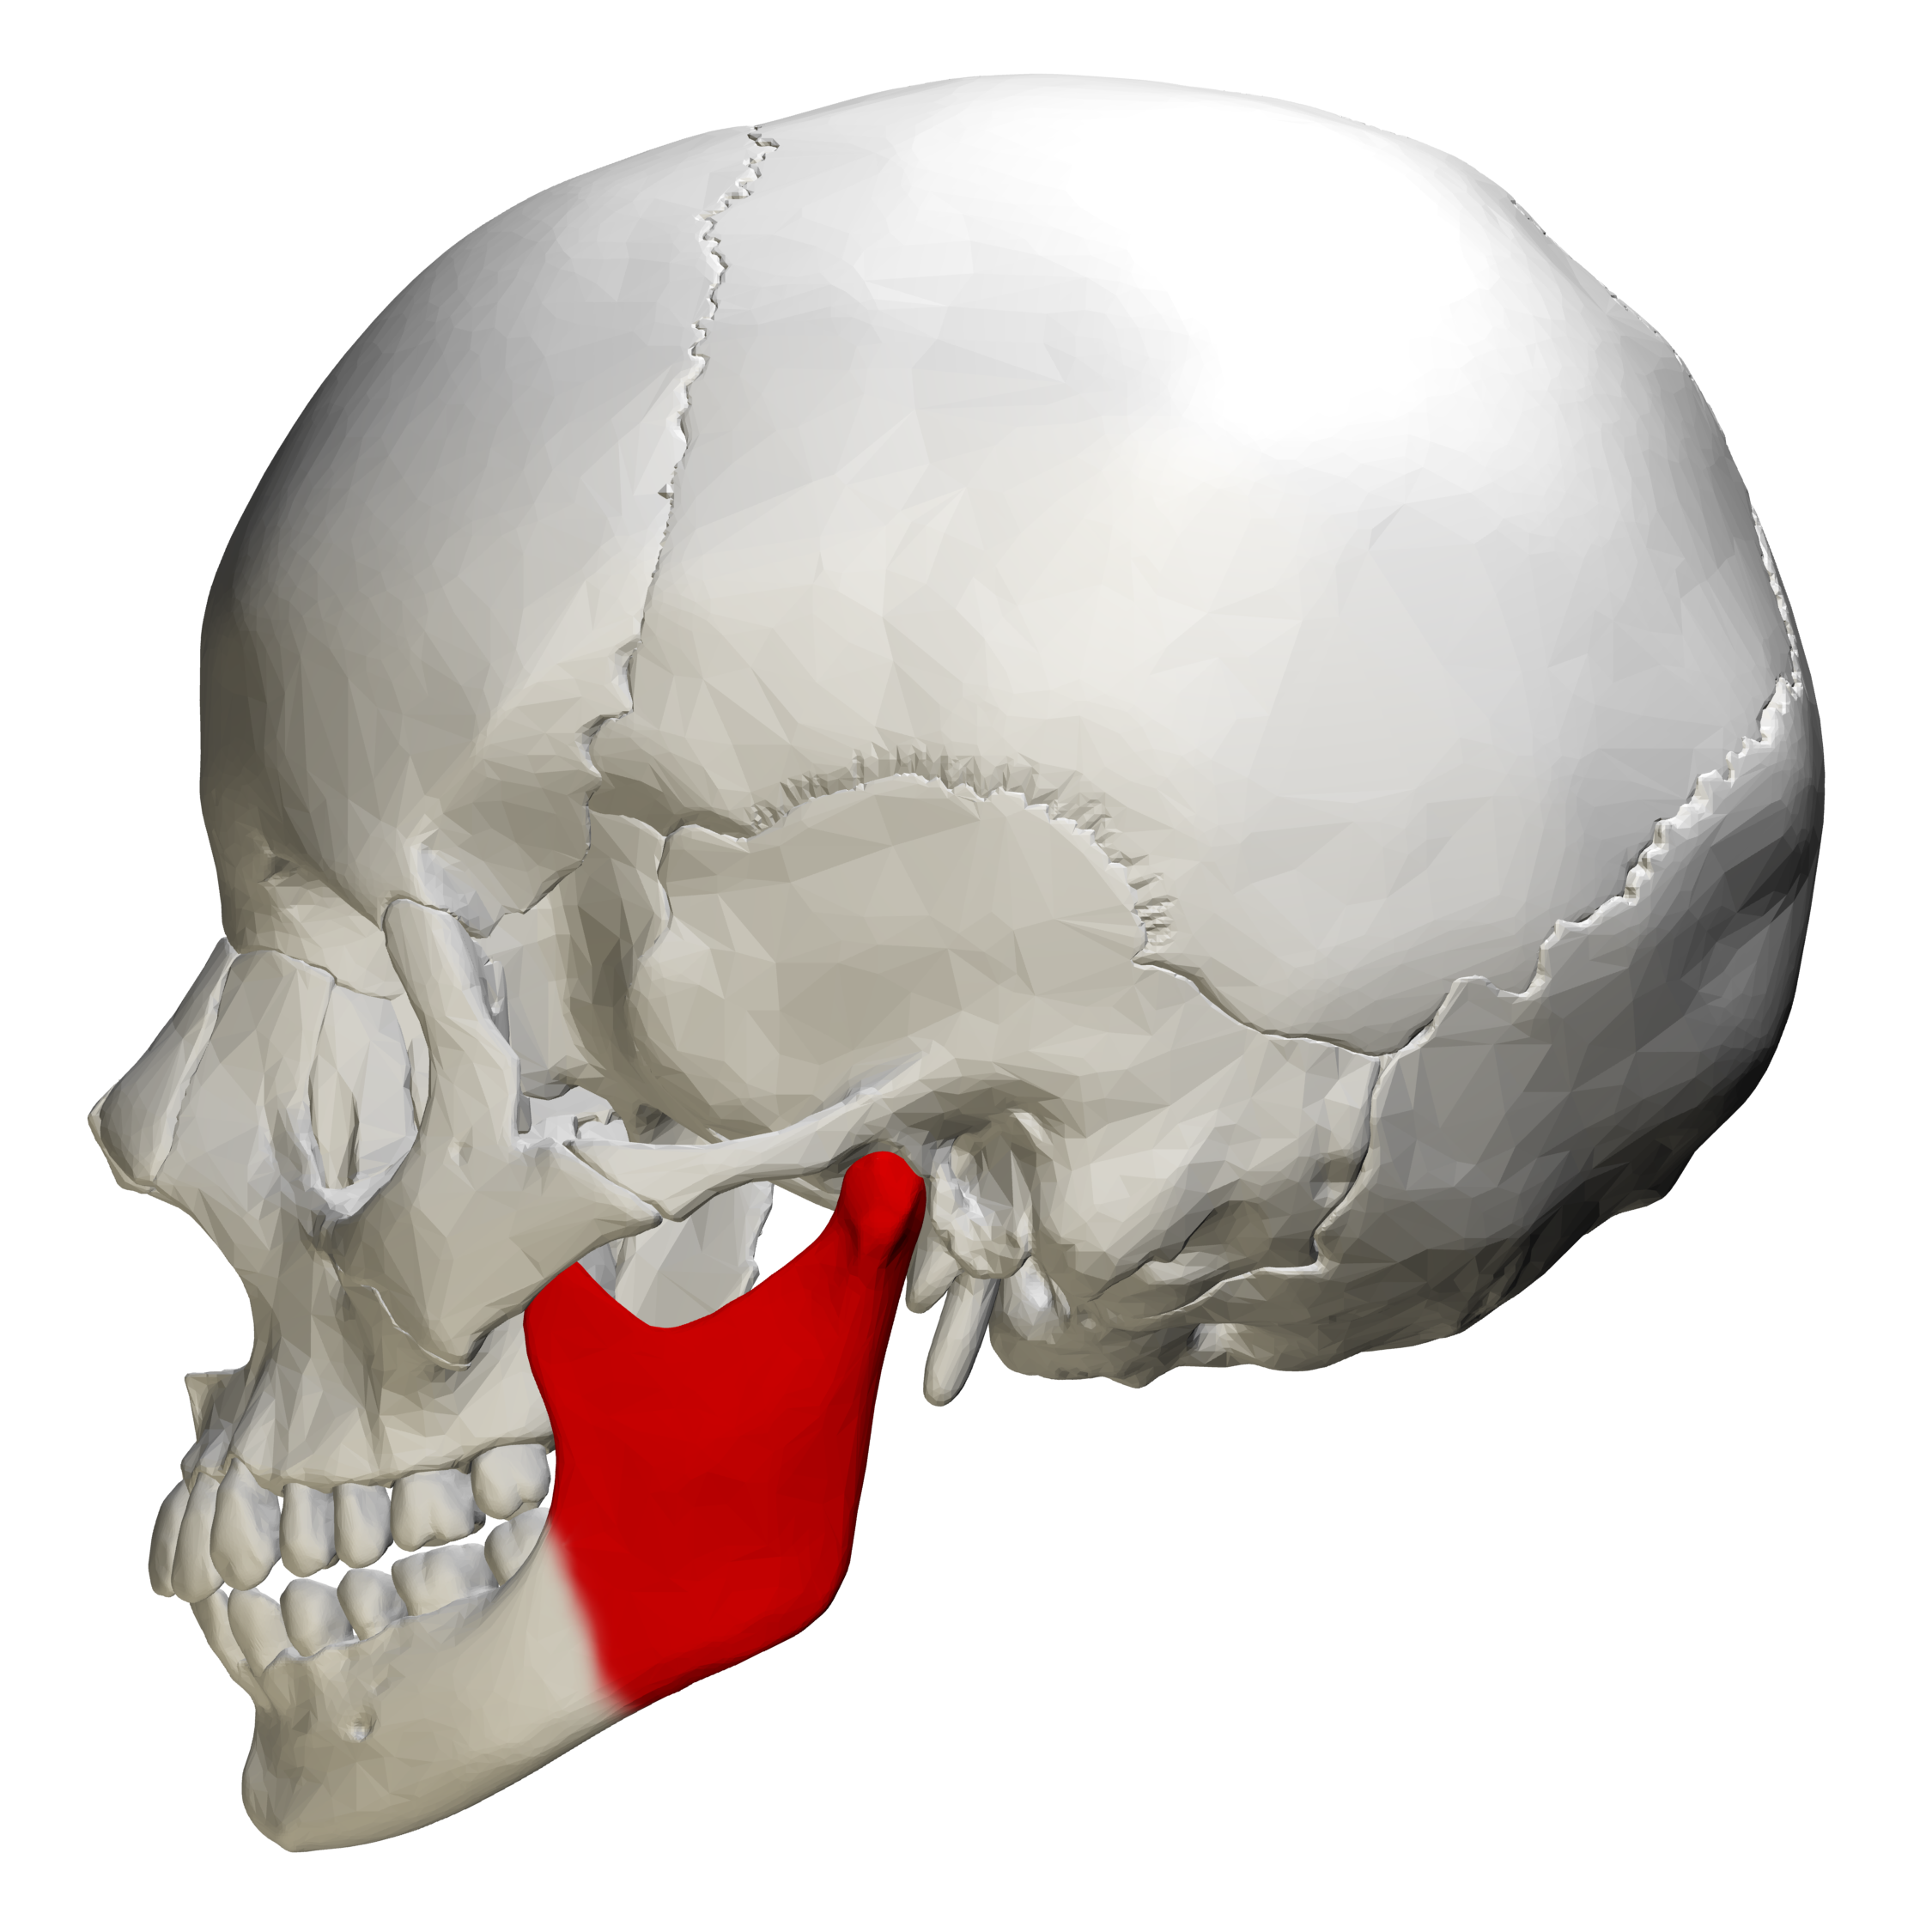 Ramus_of_the_mandible_-_skull_-_lateral_view.png